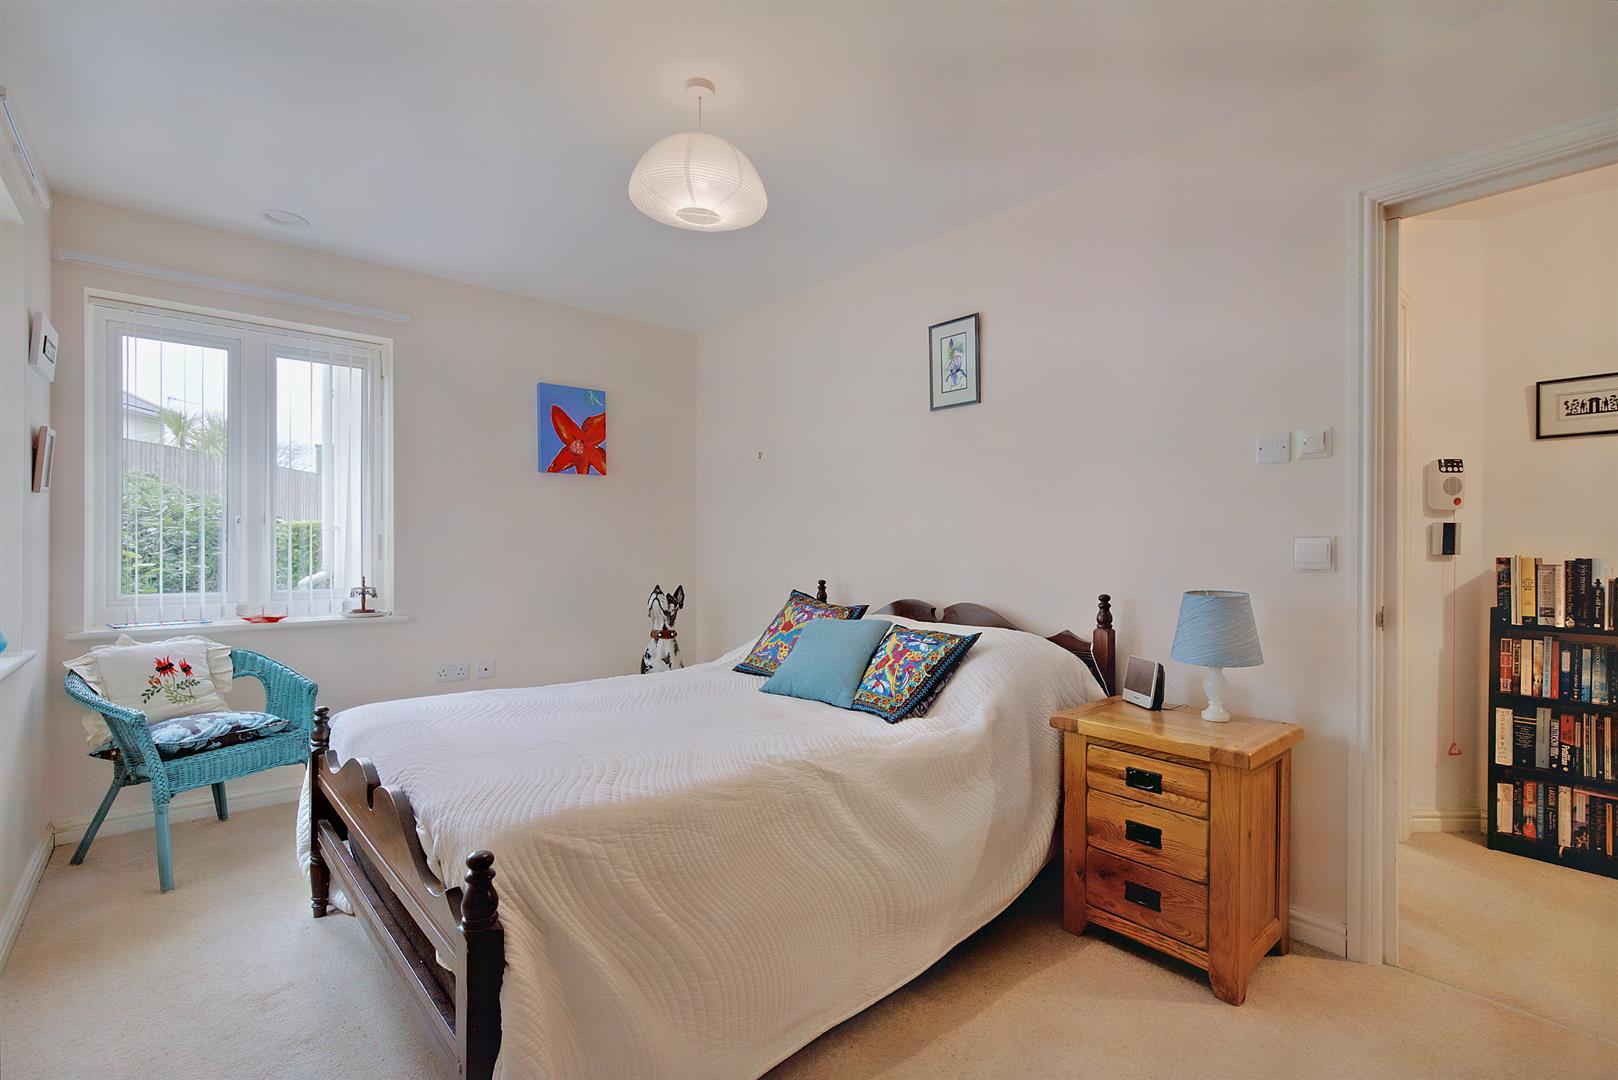 Hecla Drive, Carbis Bay, St. Ives, Cornwall, TR26 2PH